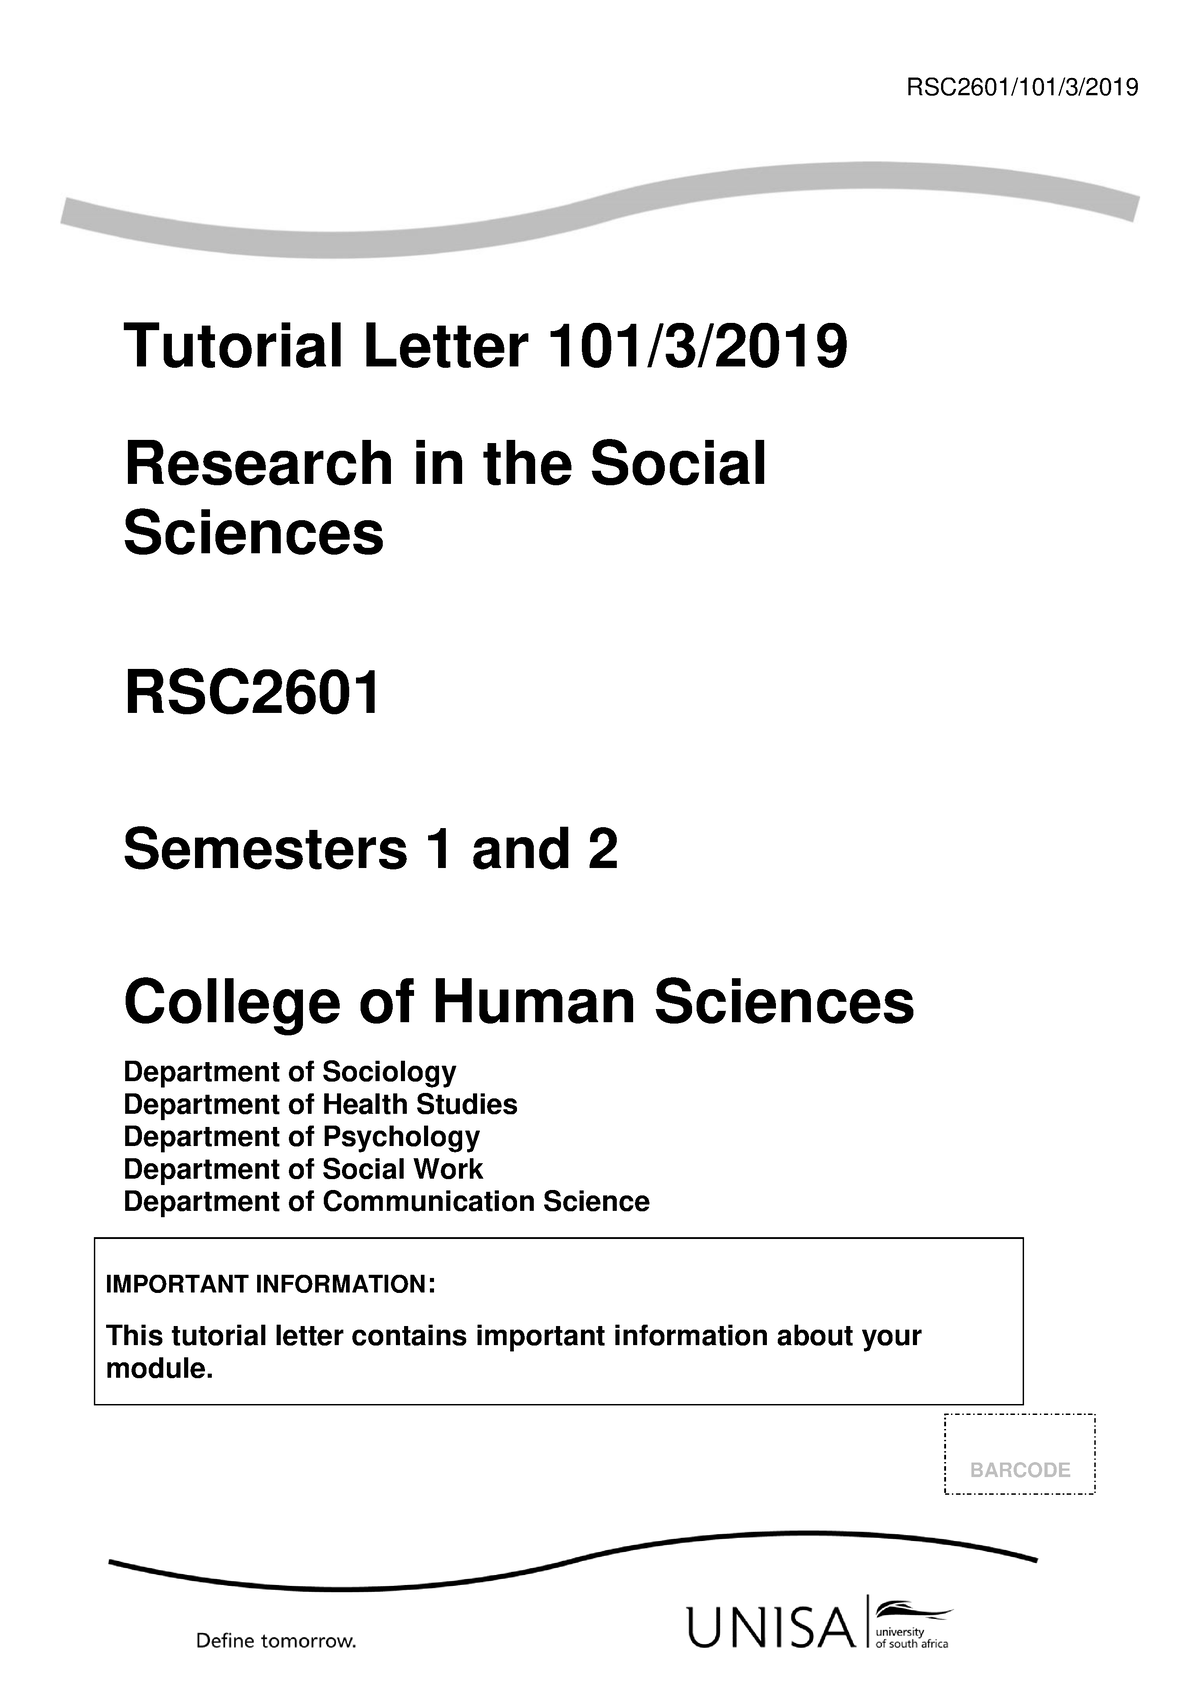 the introduction to a research report should rsc2601